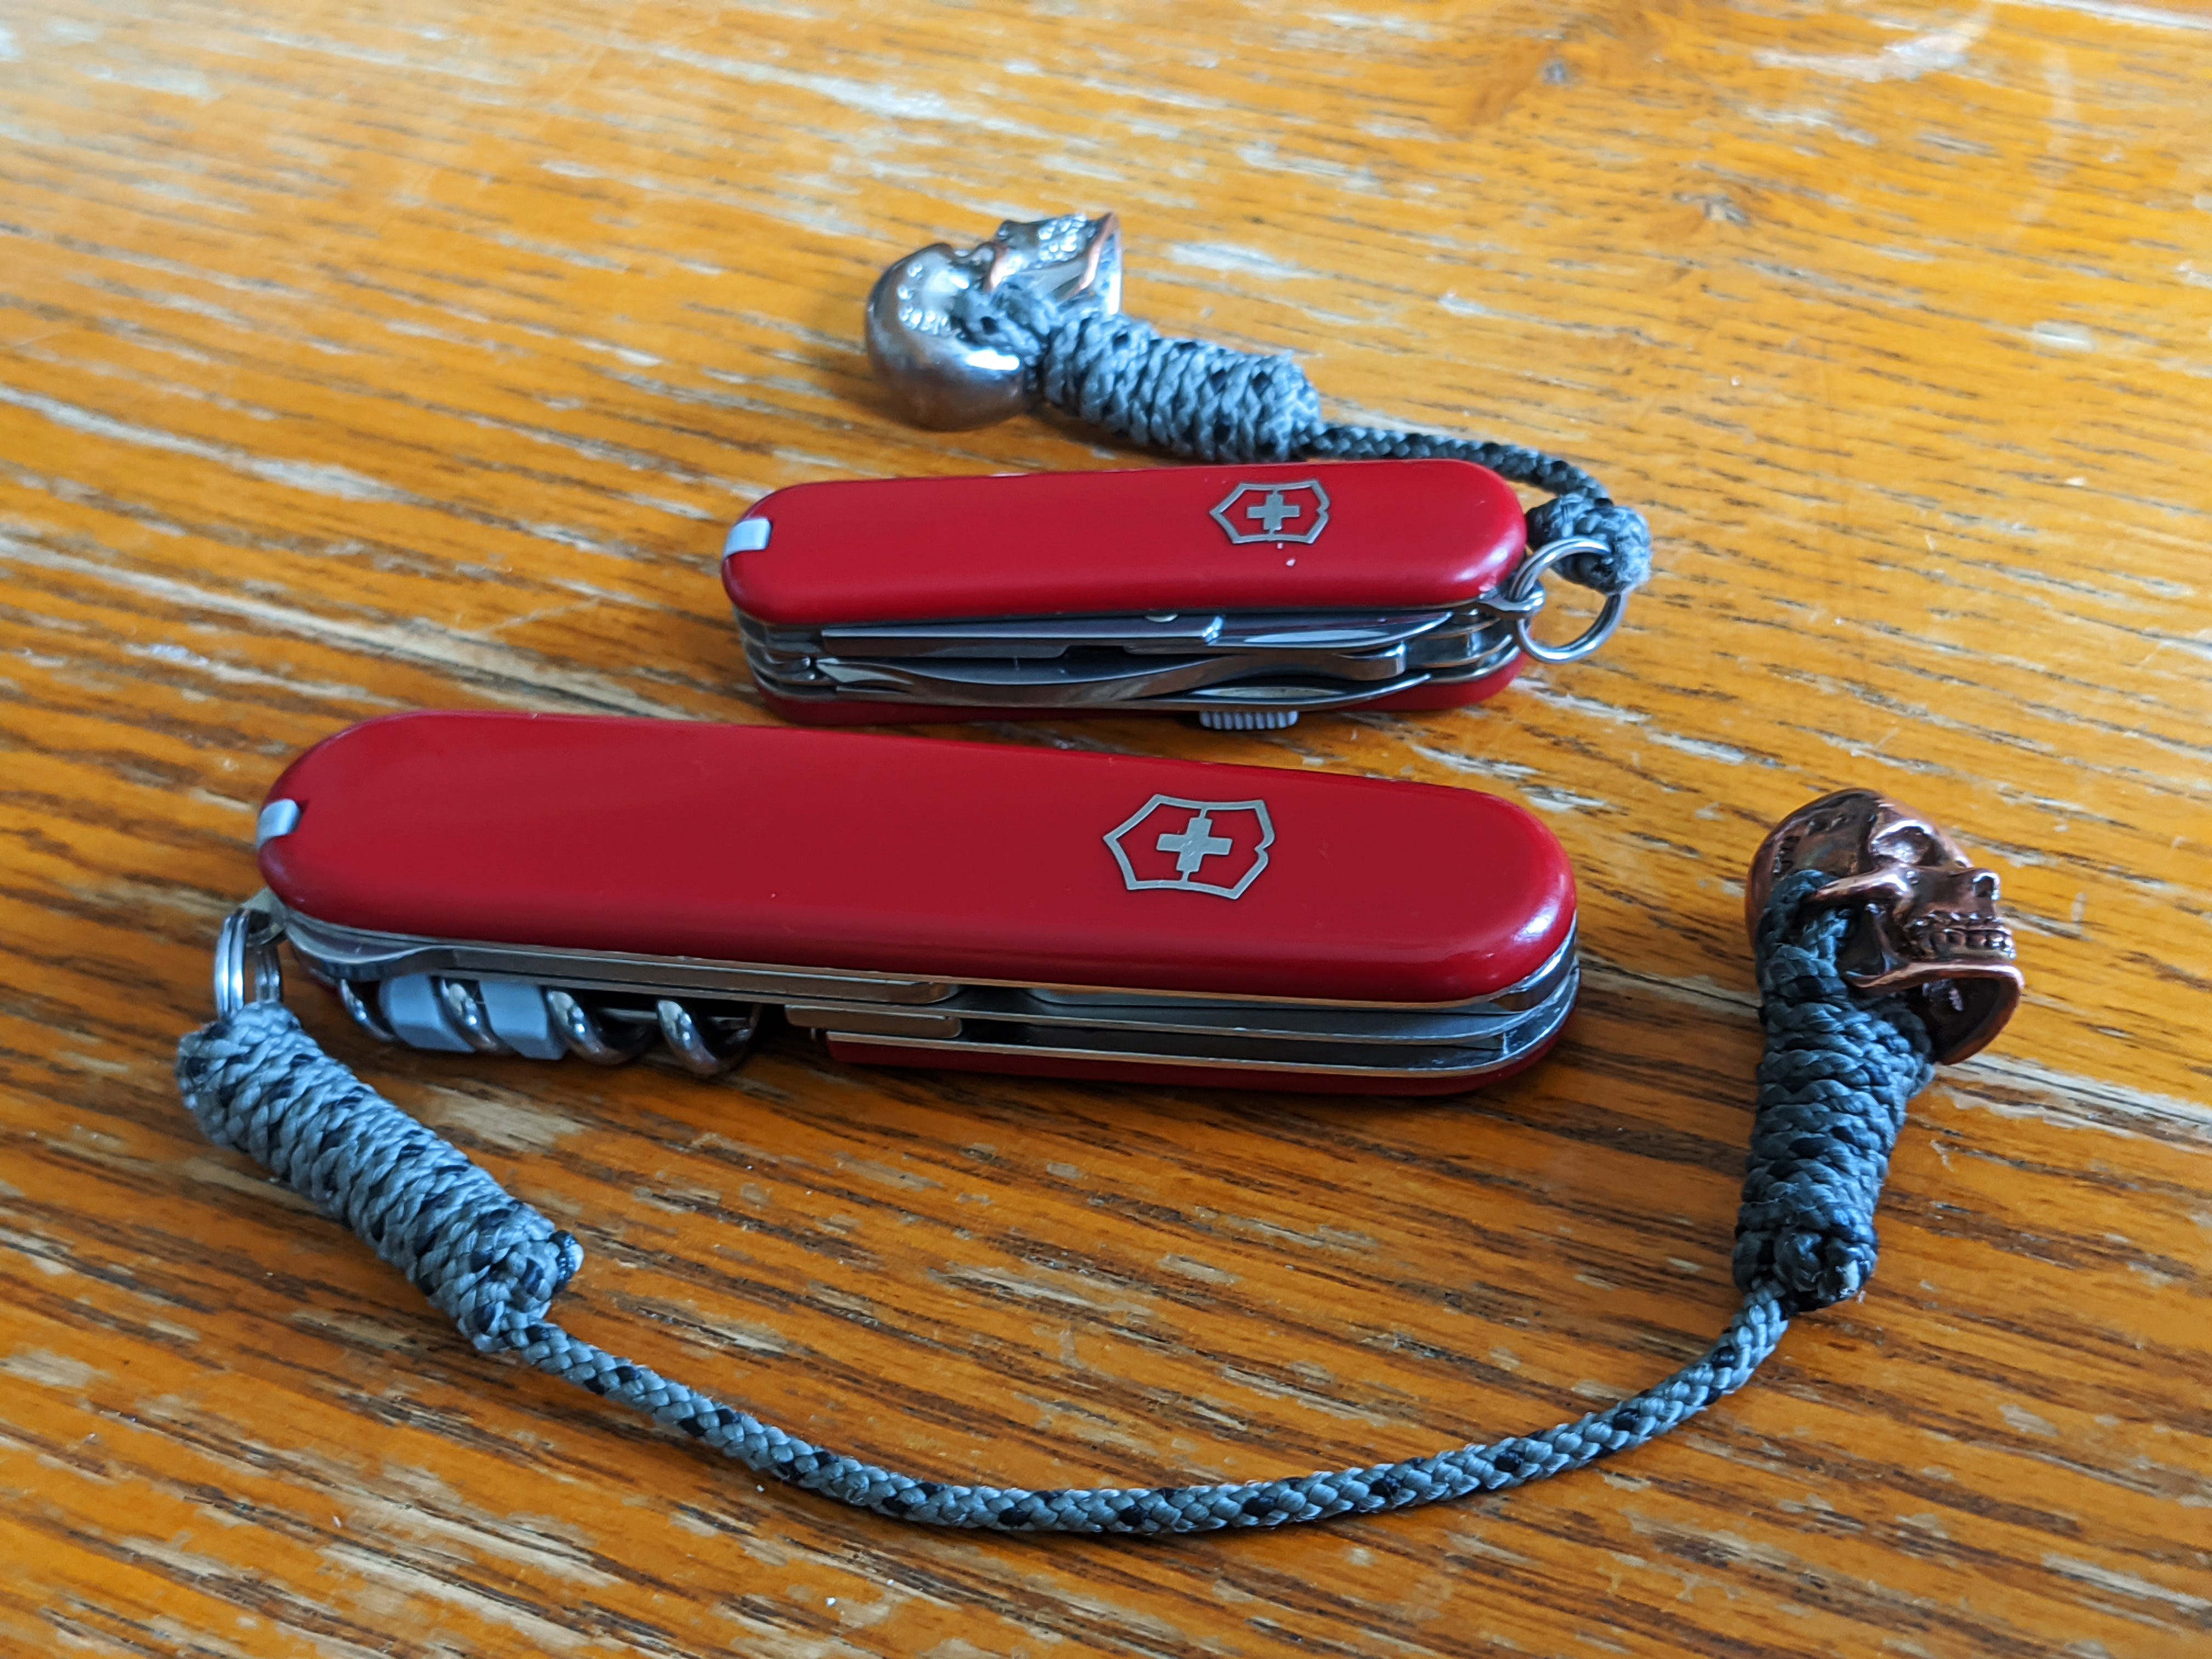 The Two Swiss Army Knives You Should Own